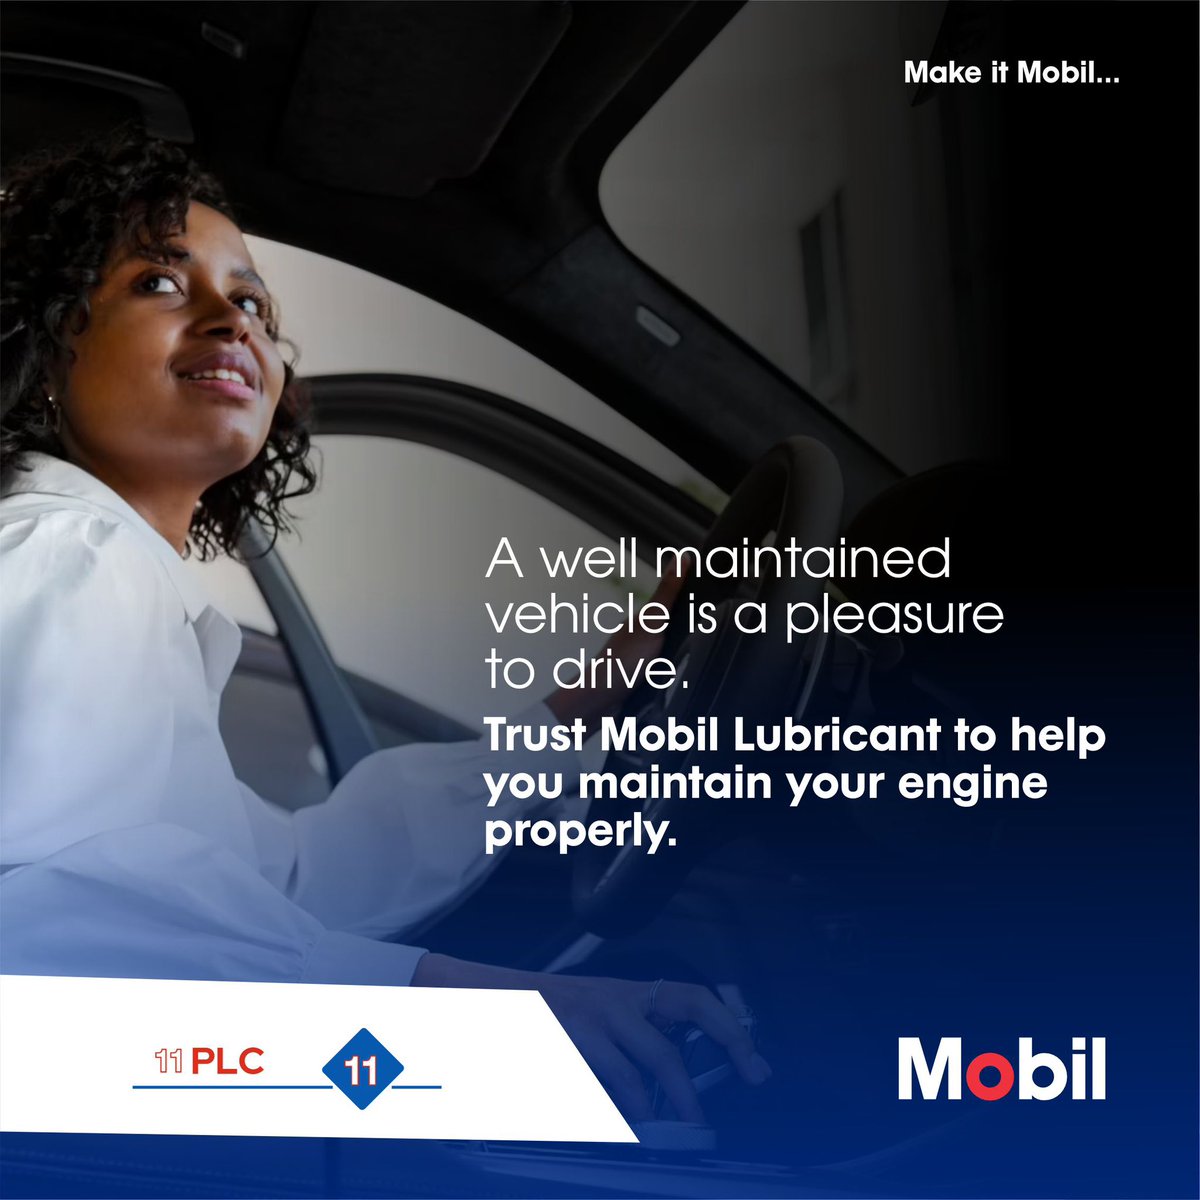 Trust Mobil lubricants to help you treat your automobile with care and love.

#mobillubricantes #mobilengineoil #mobiloil #mobilsuperoil #carmemes